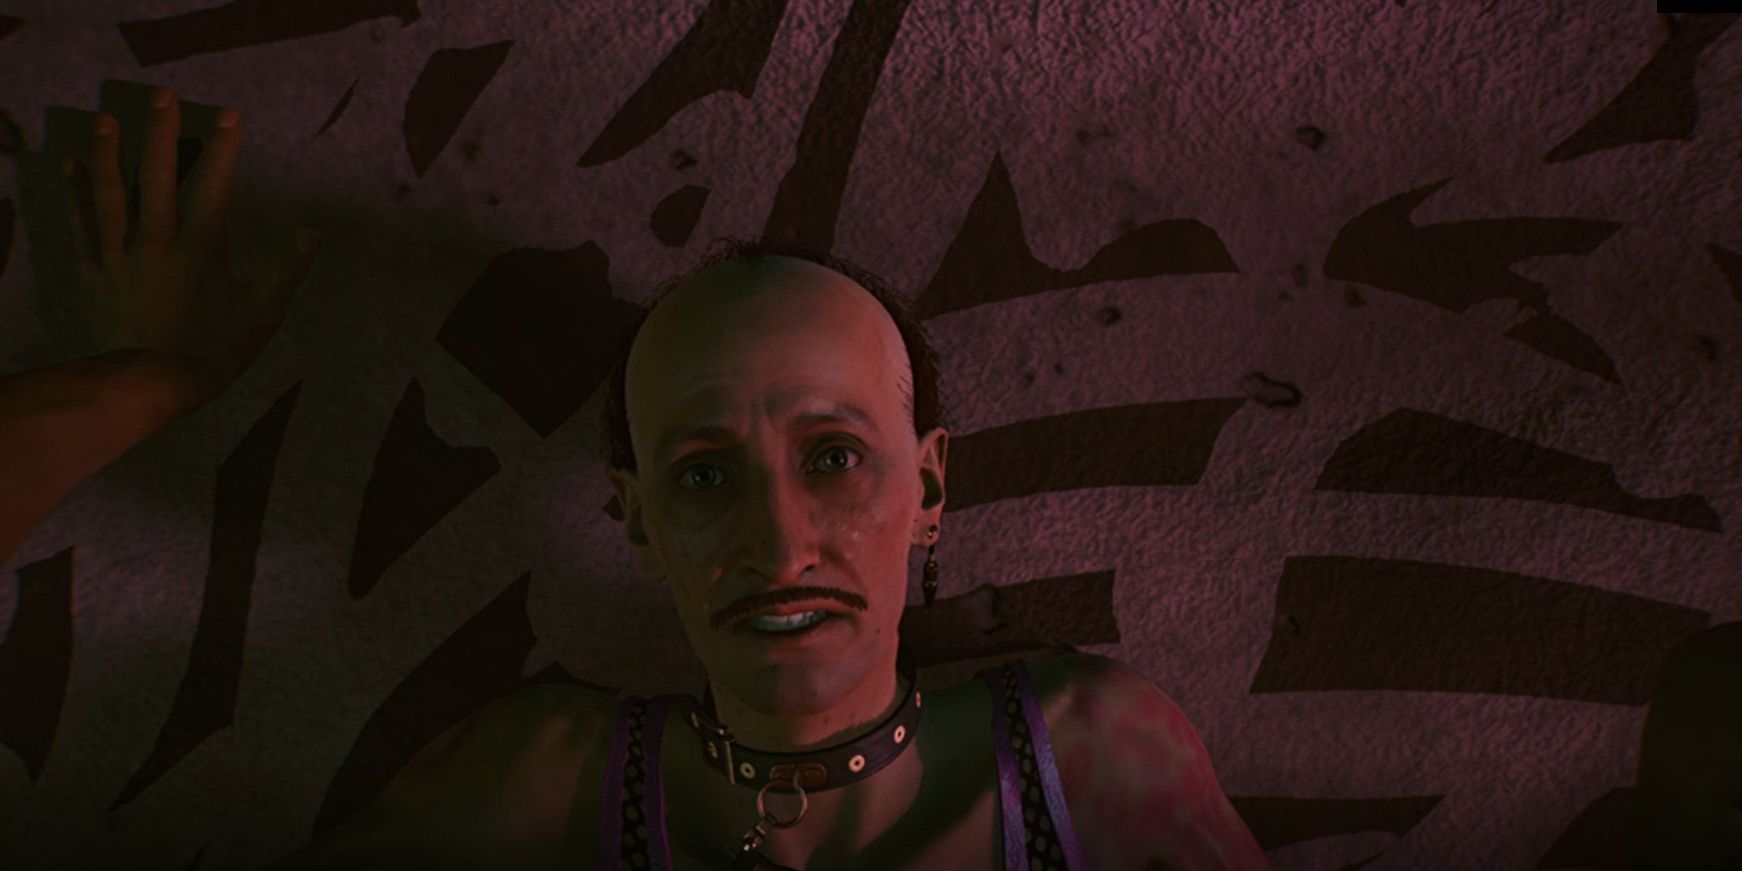 An image of Fingers the Ripperdoc in Cyberpunk 2077 with a terrified expression on his face